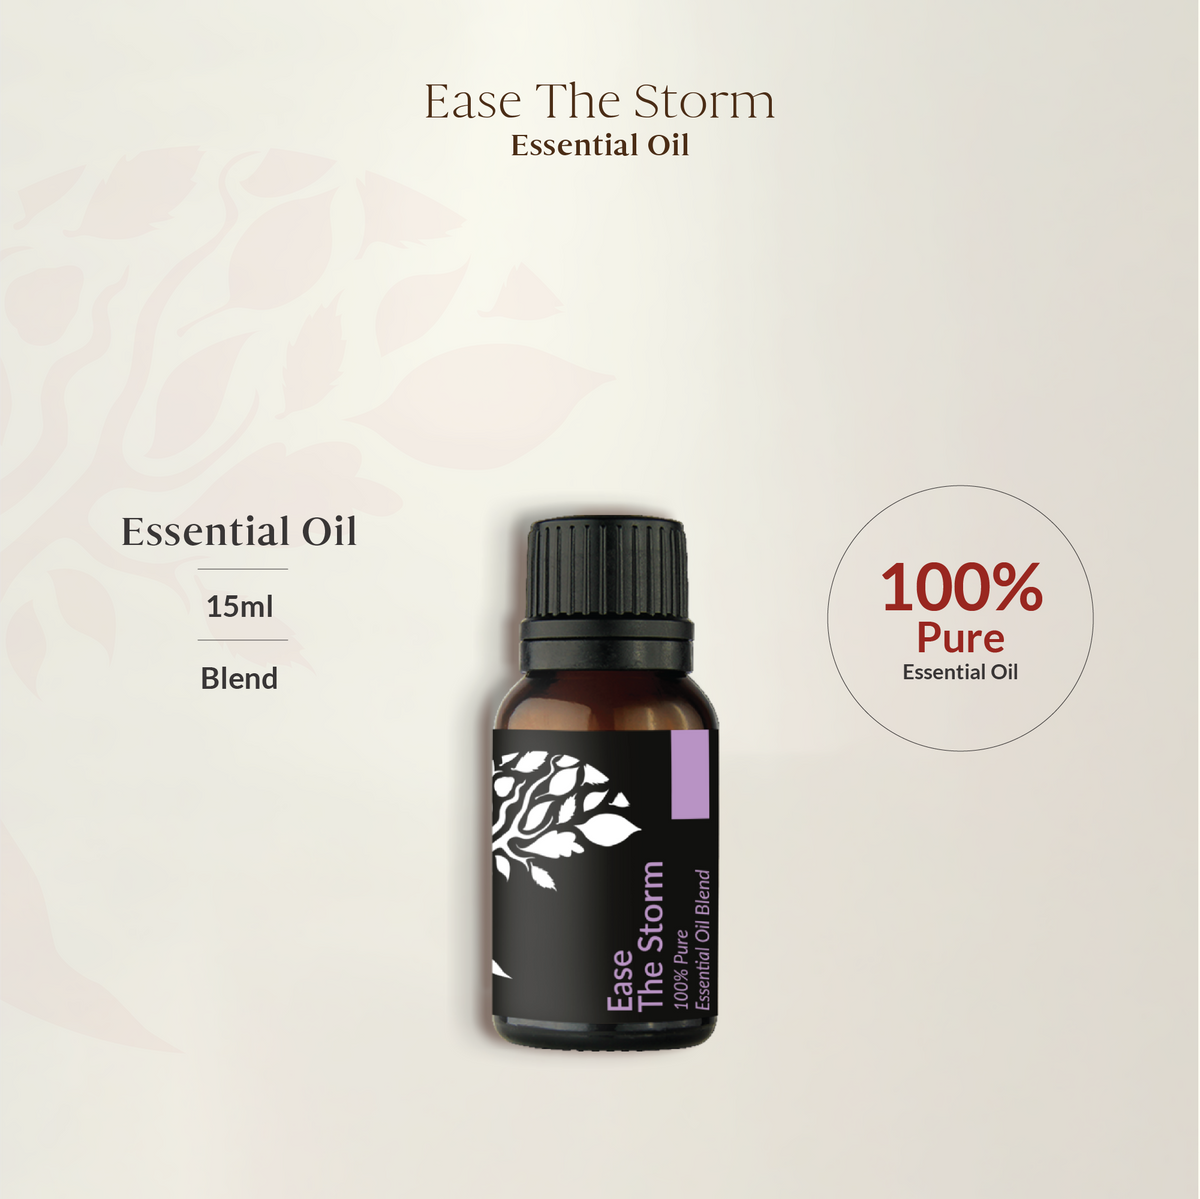 Ease The Storm Essential Oil Blend 15ml